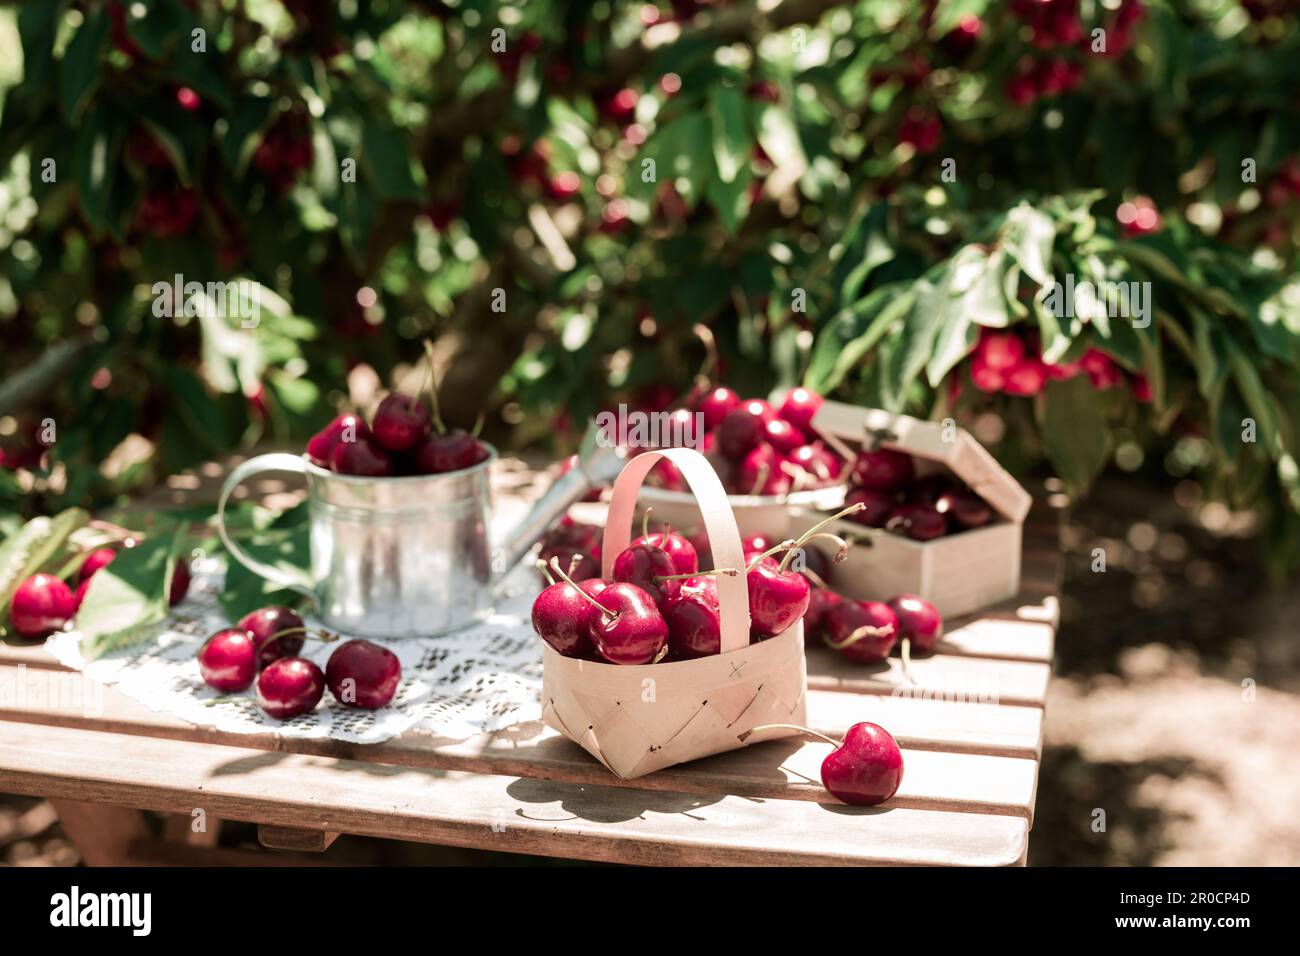 harvest of juicy cherry berries on table against background of cherry trees with cherry berries Stock Photo